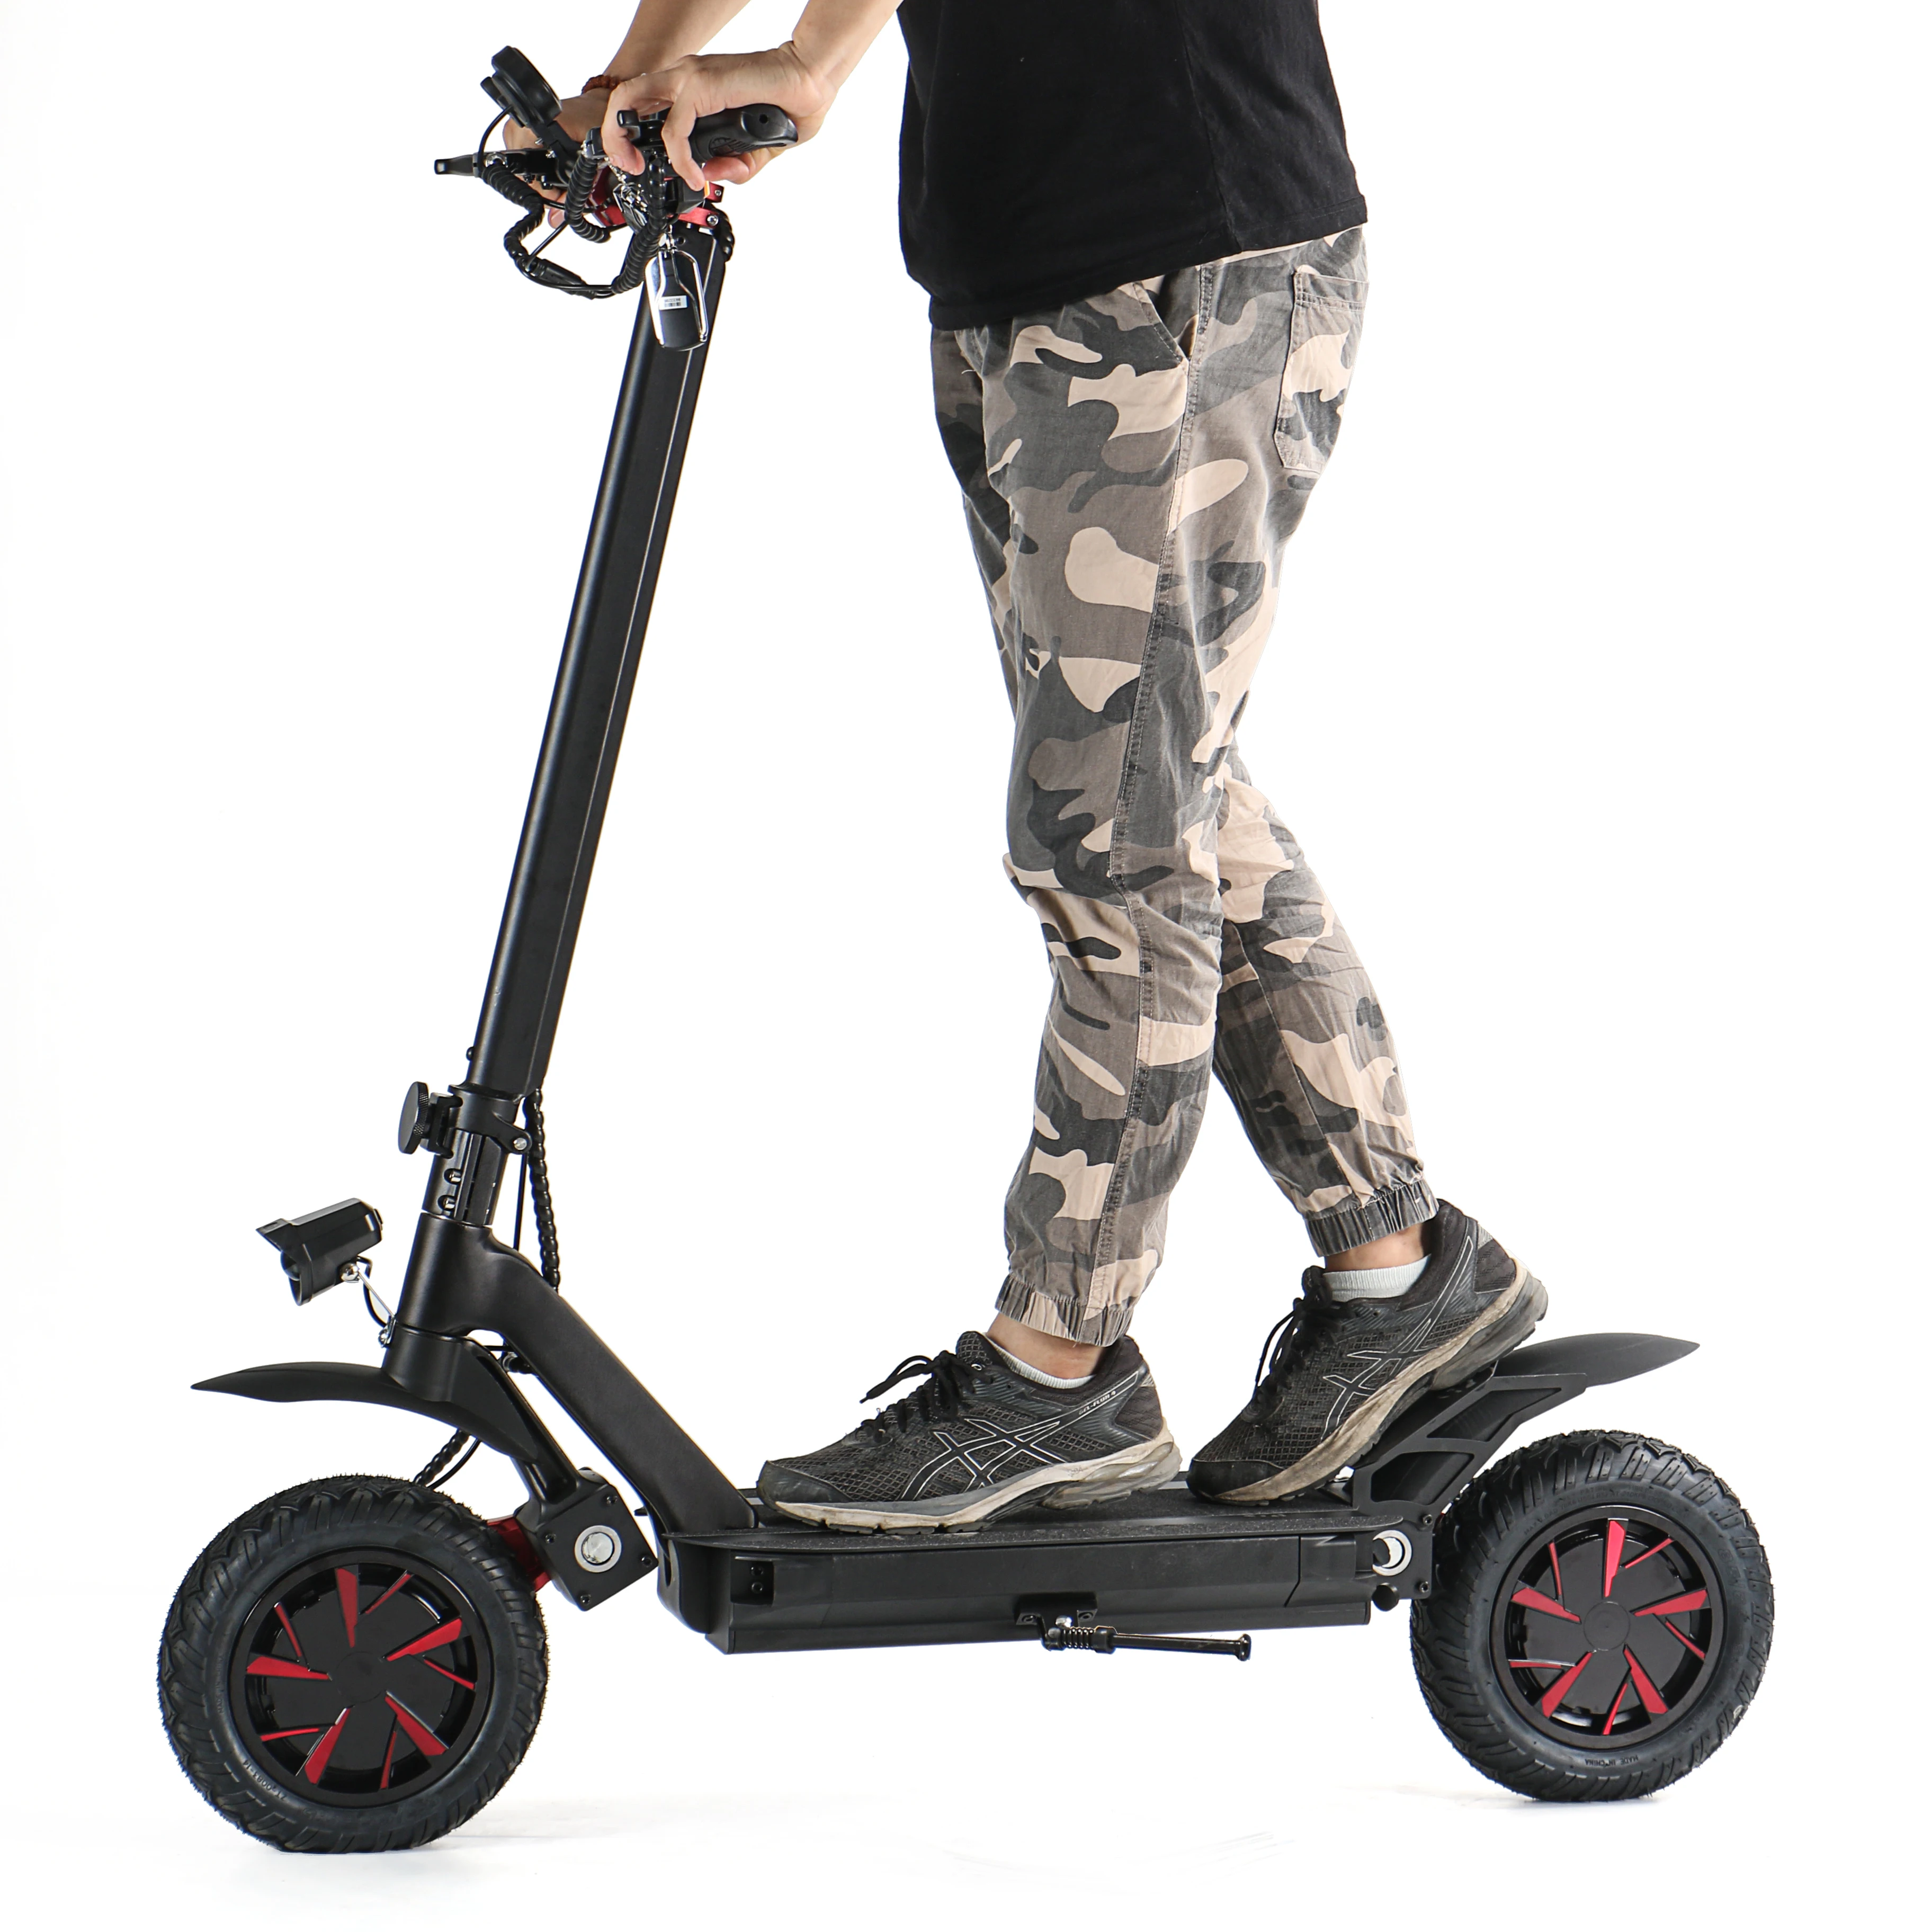 

2020 China EcoRider E4-9 2000W Foldable Electric Scooters Powerful High Speed Mobility Electric Scooter Off Road